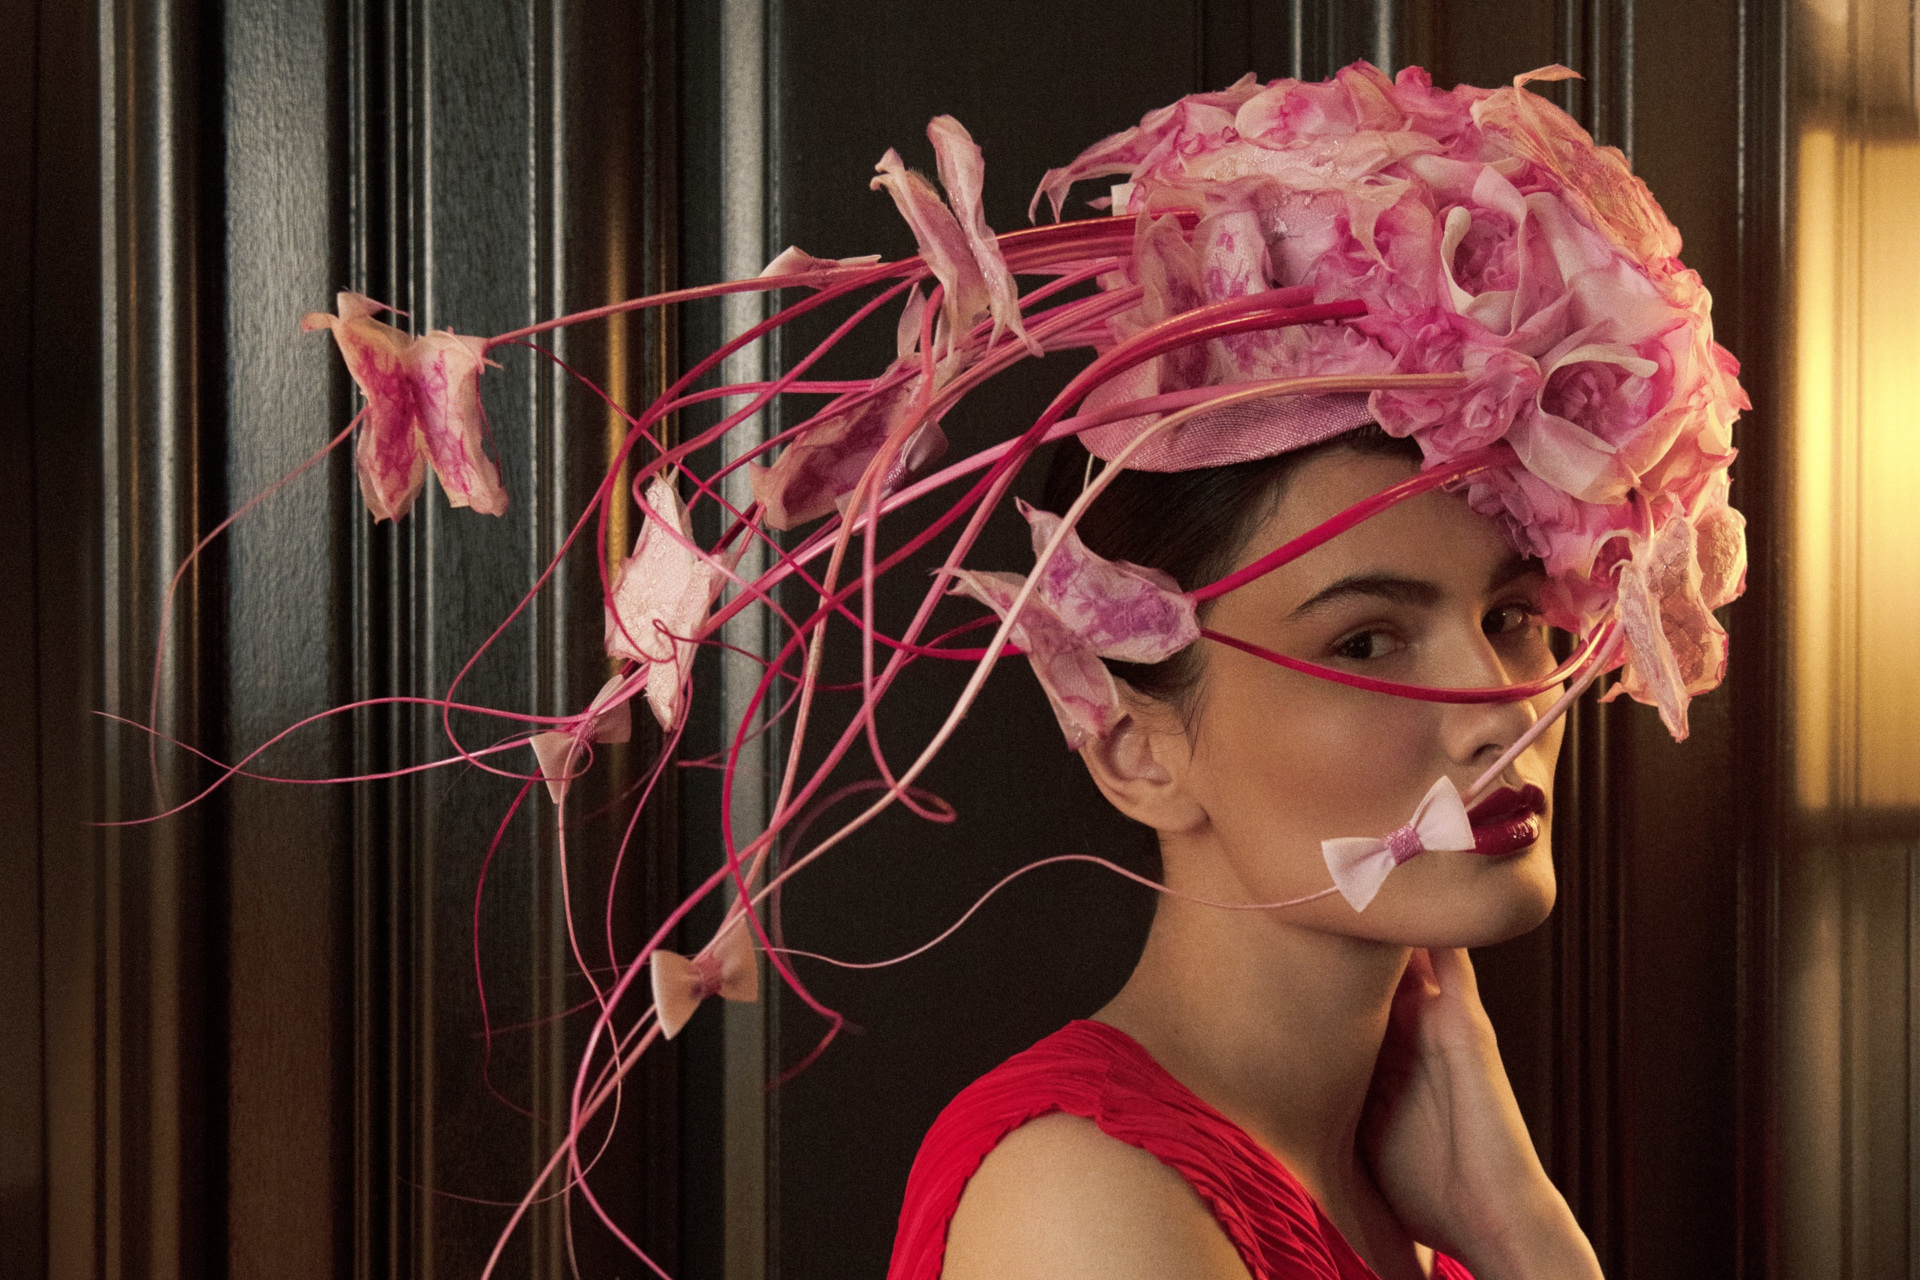 Slideshow: Headwear From the Royal Ascot Races